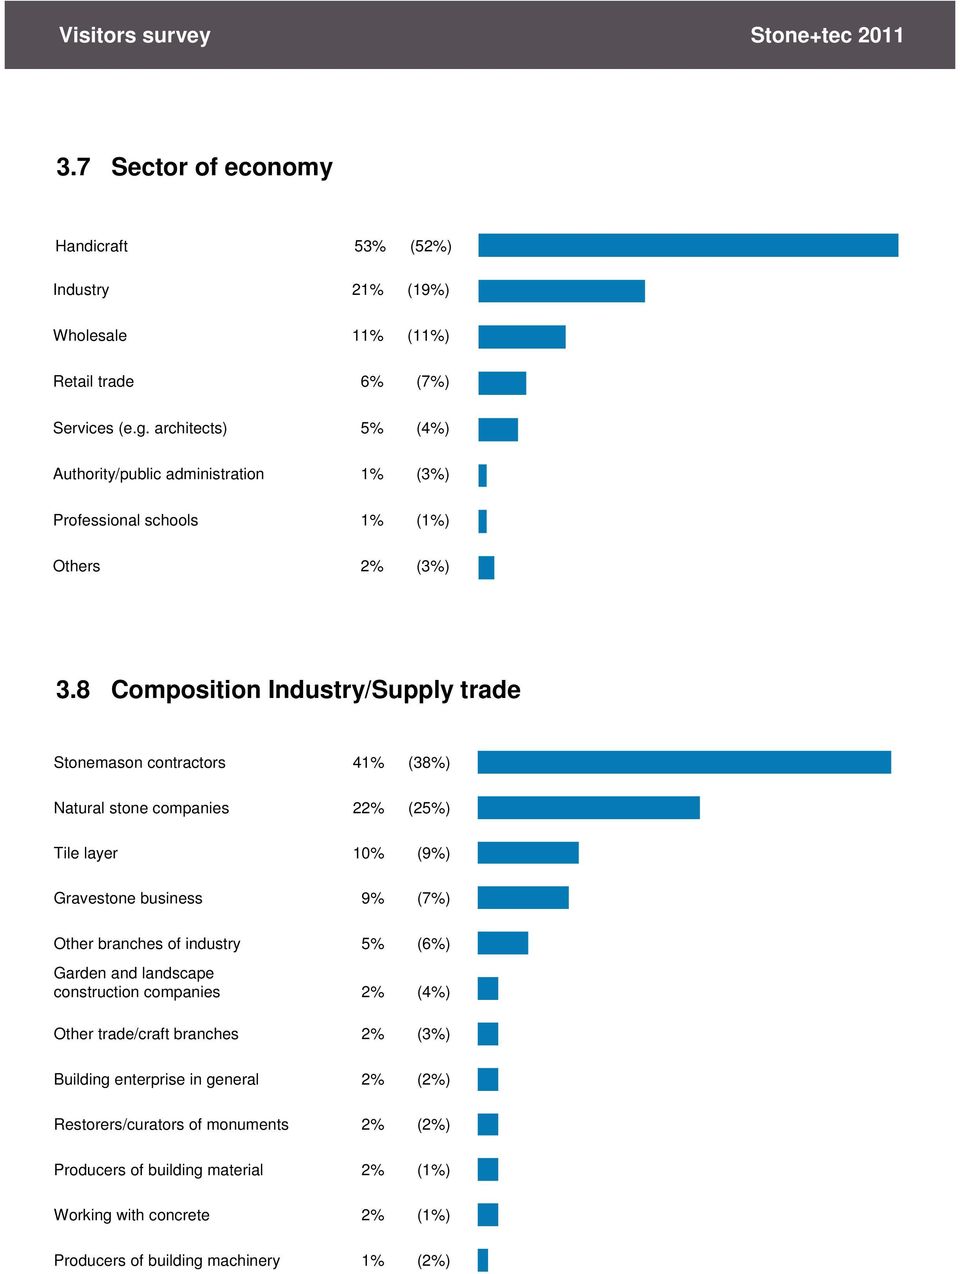 8 Composition Industry/Supply trade Stonemason contractors 41% (38%) Natural stone companies 22% (25%) Tile layer 10% (9%) Gravestone business 9% (7%) Other branches of industry